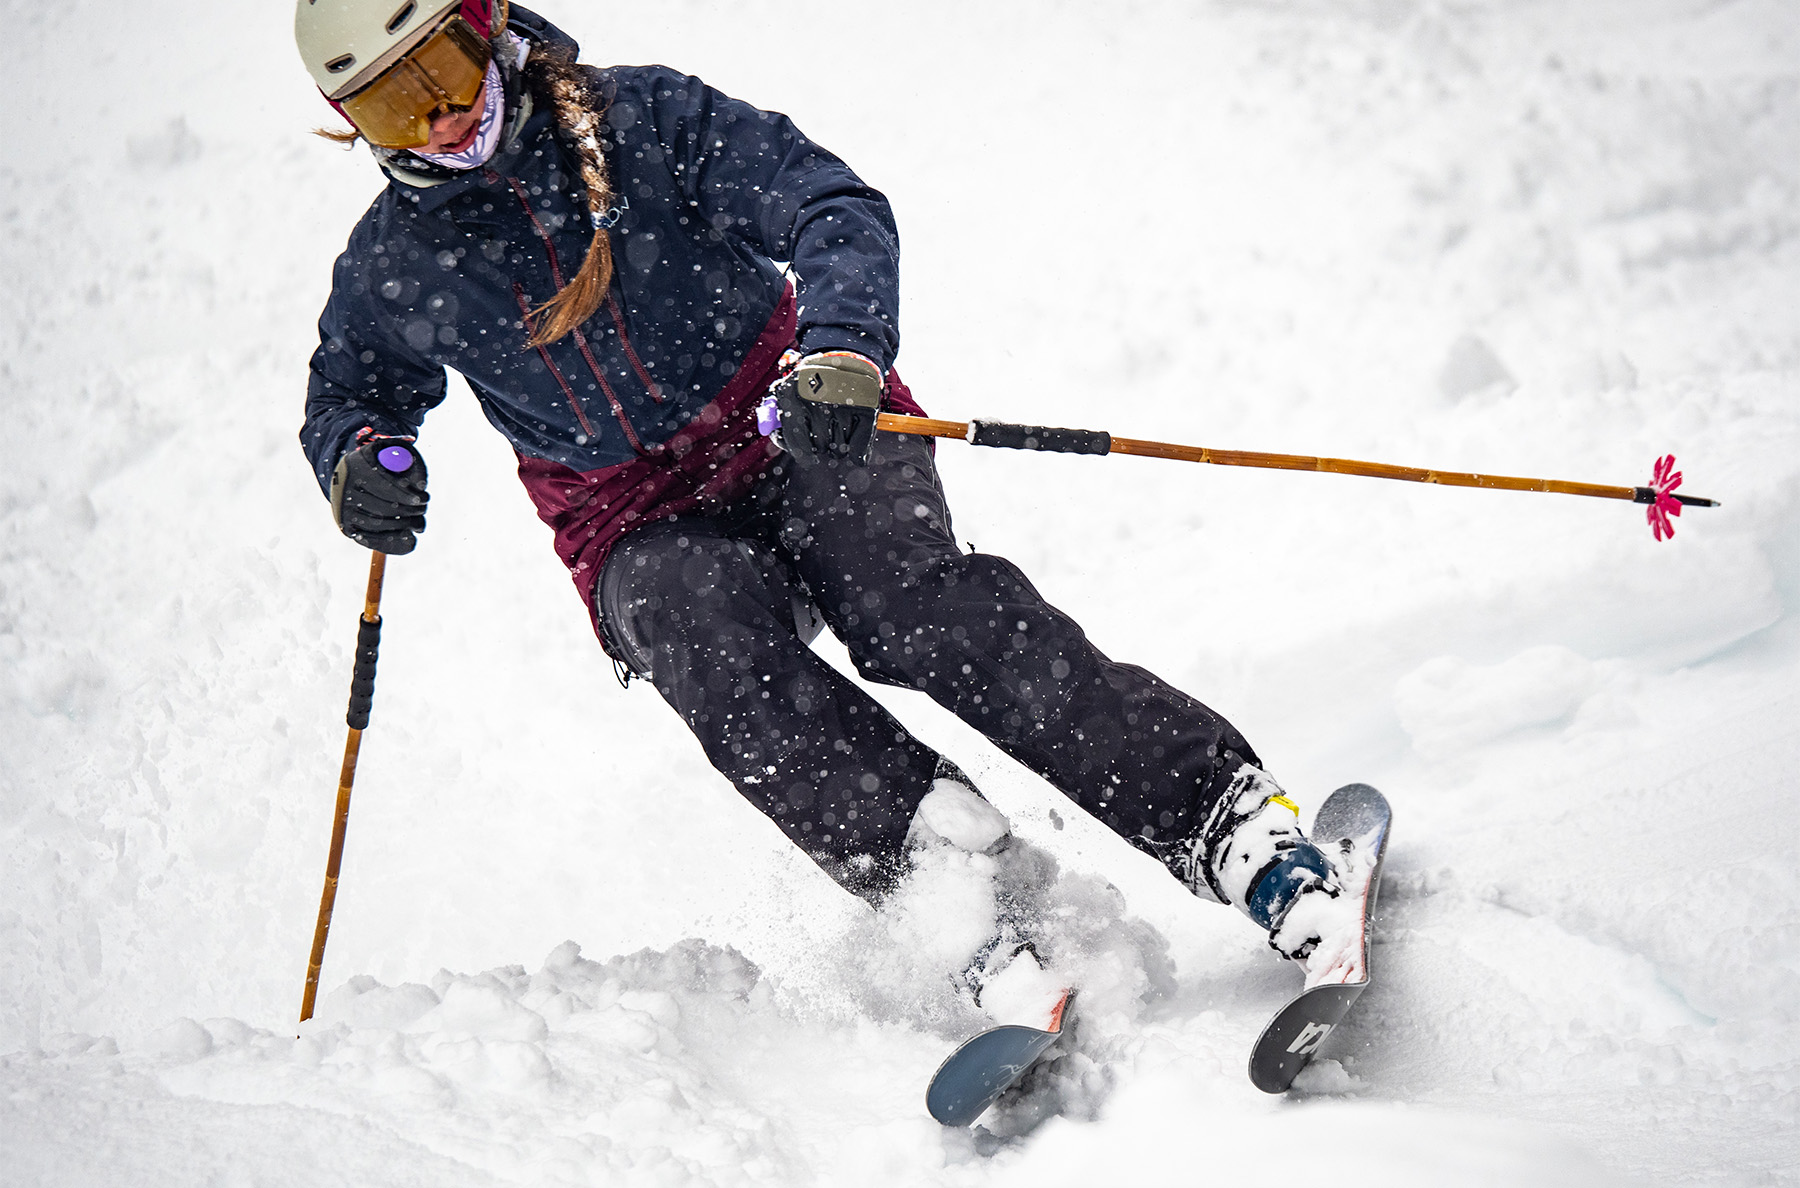 Kara Williard reviews the Nordica Unleashed 108 W for BLISTER.